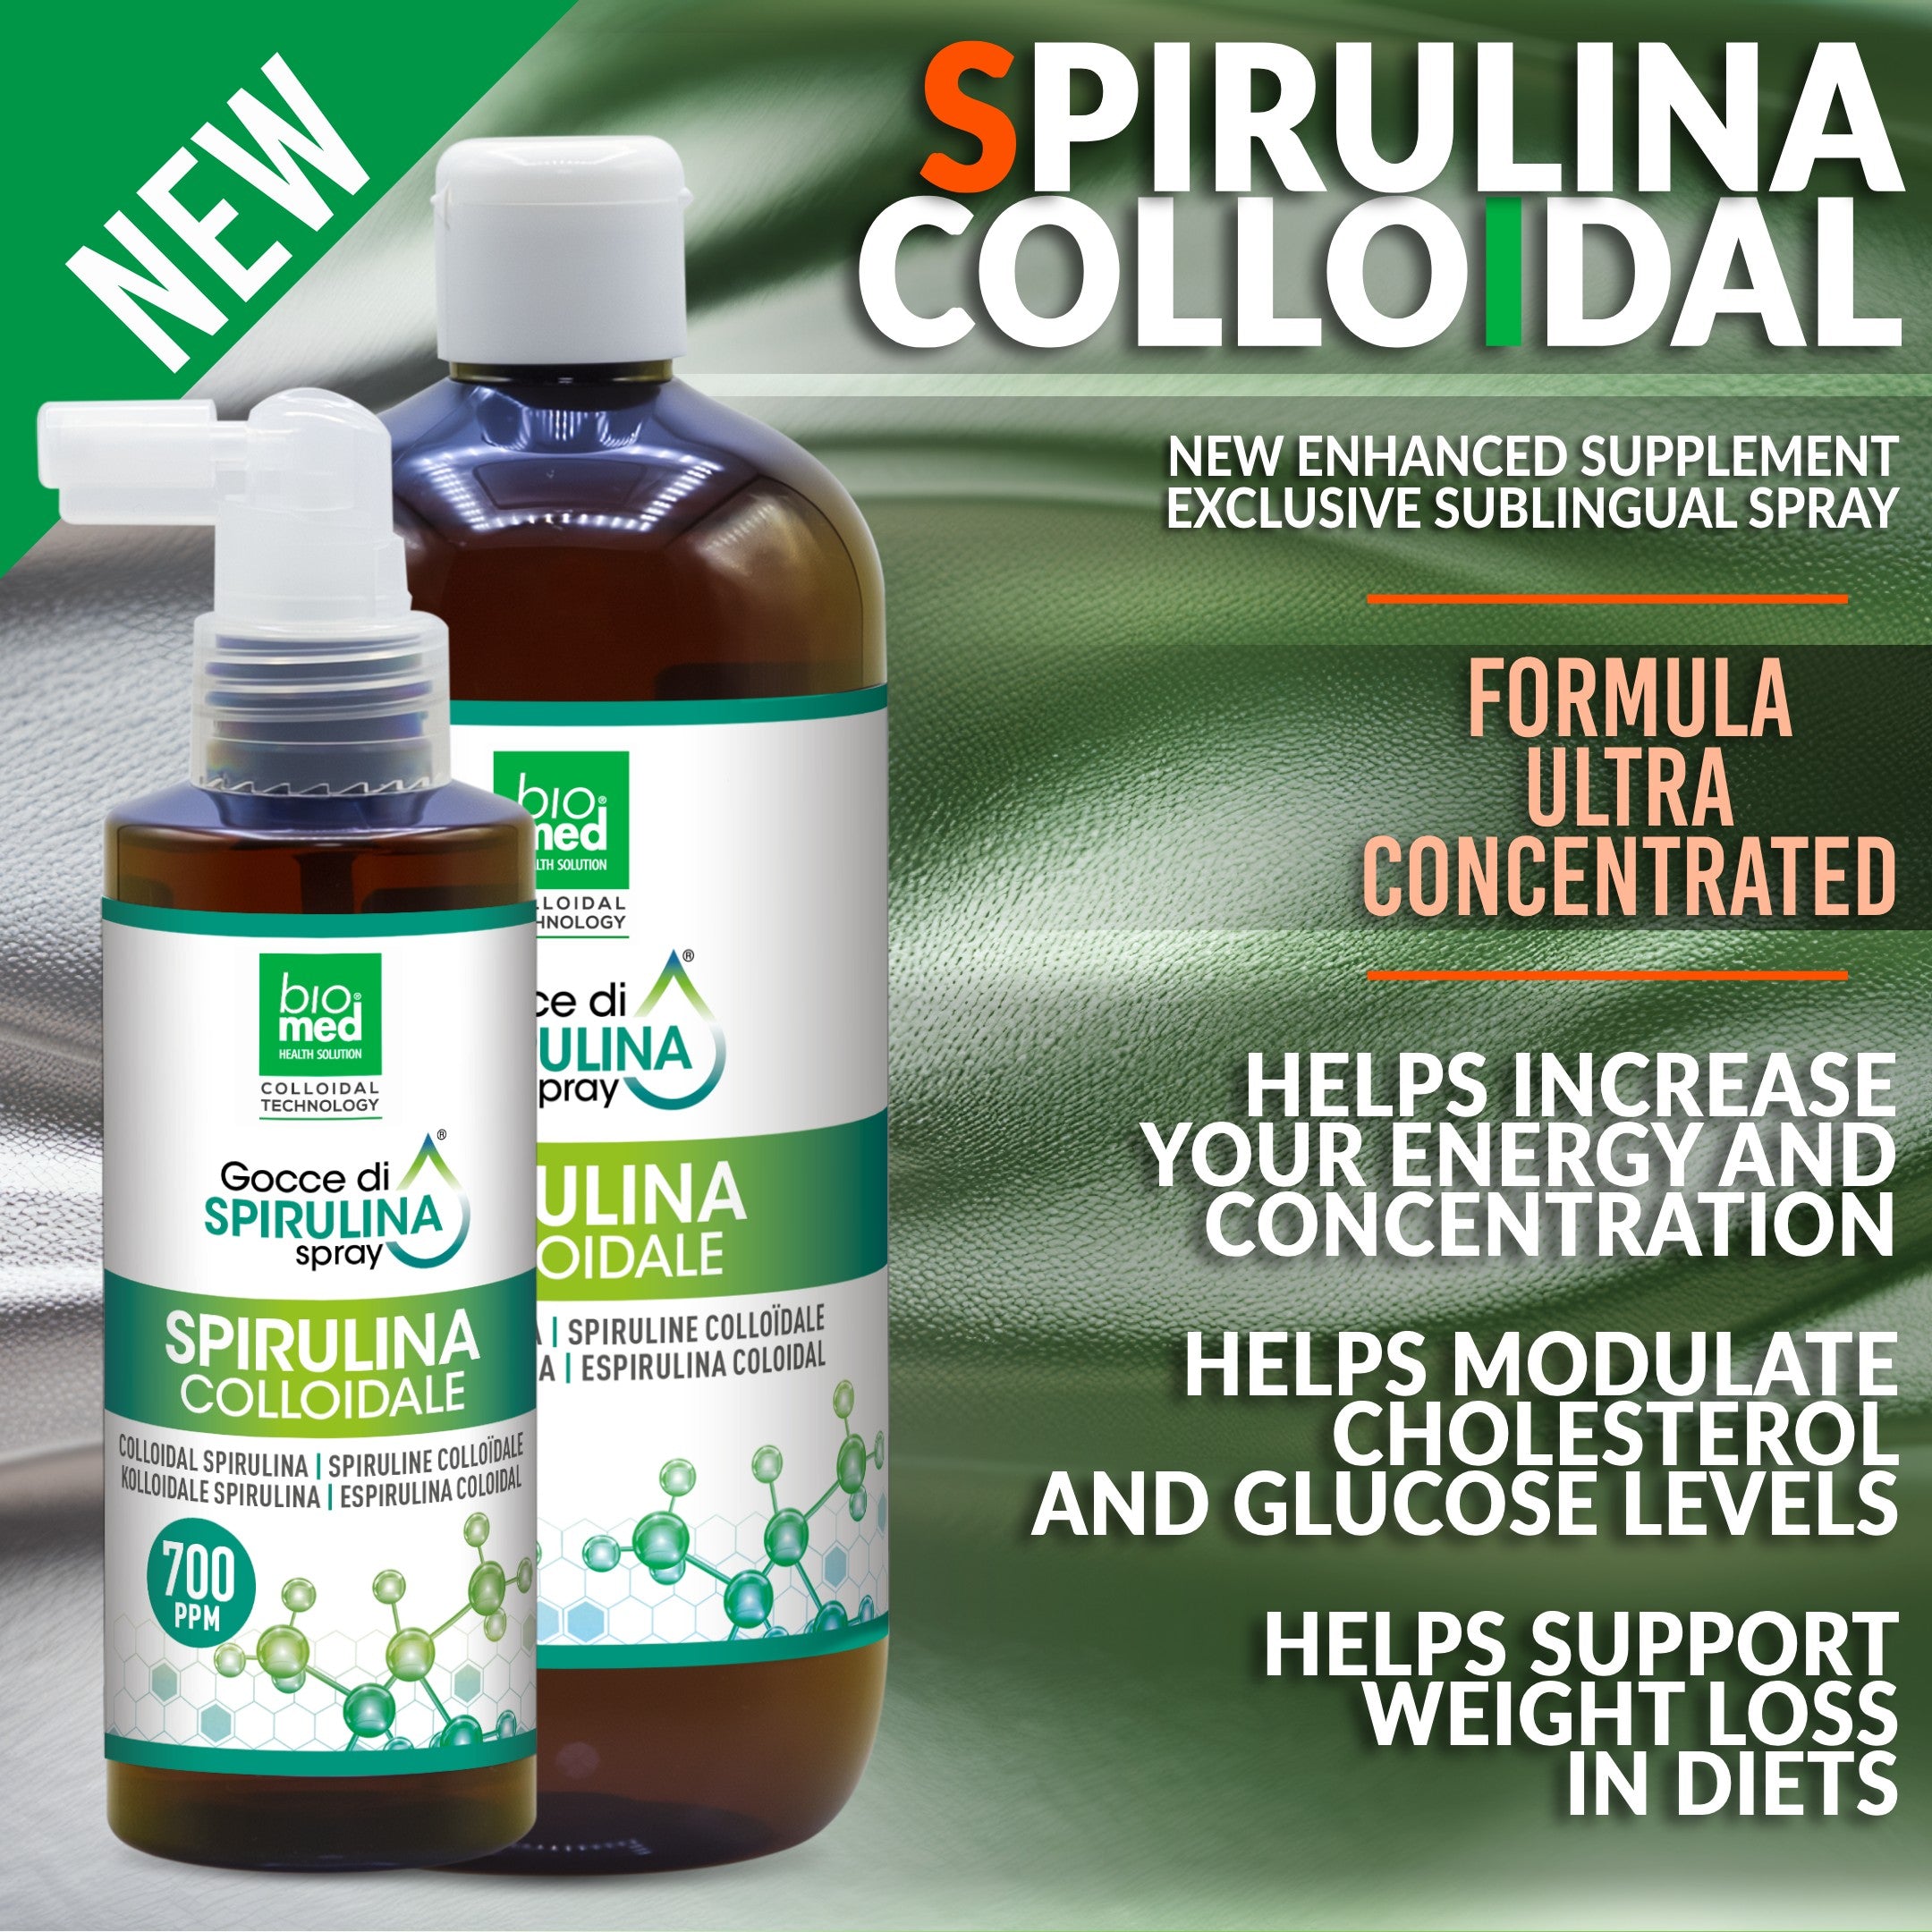 COLLOIDAL SPIRULINA SPRAY ULTRA-CONCENTRATED - BIOMED DROPS - 700PPM